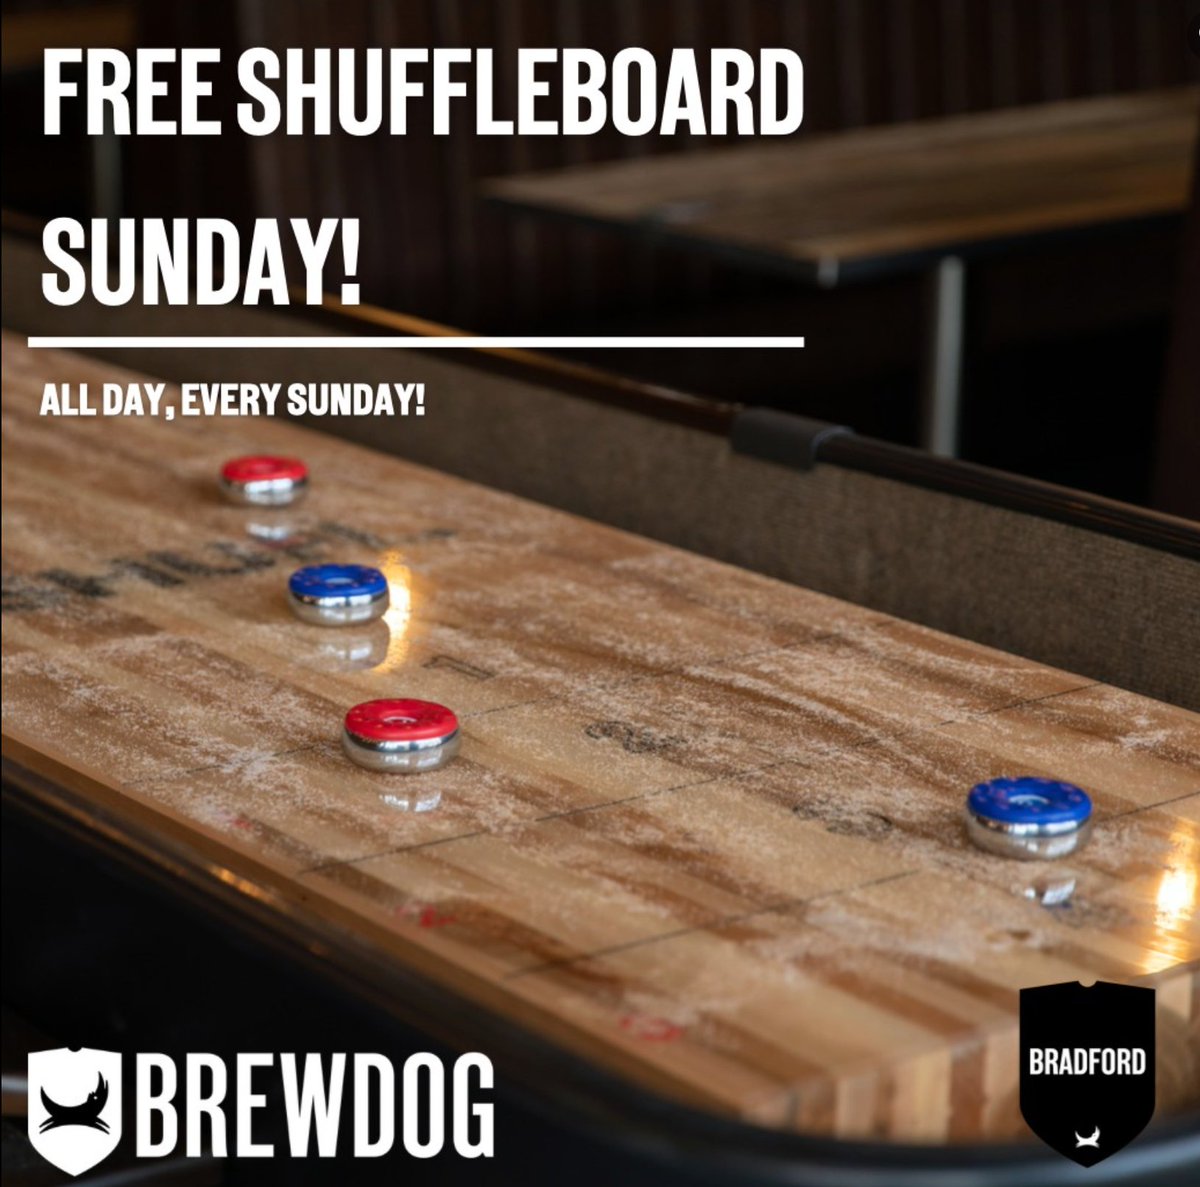 Fancy adding a bit of fun to your Sundays?😉 Why not grab some friends and challenge them to a game on our famous SHUFL boards?🤩 With great food and refreshing cold pints, your Sunday couldn't get any better!😀 #brewdogbradford #bradfordbar #shufl #sundayfunday #shuffleboard